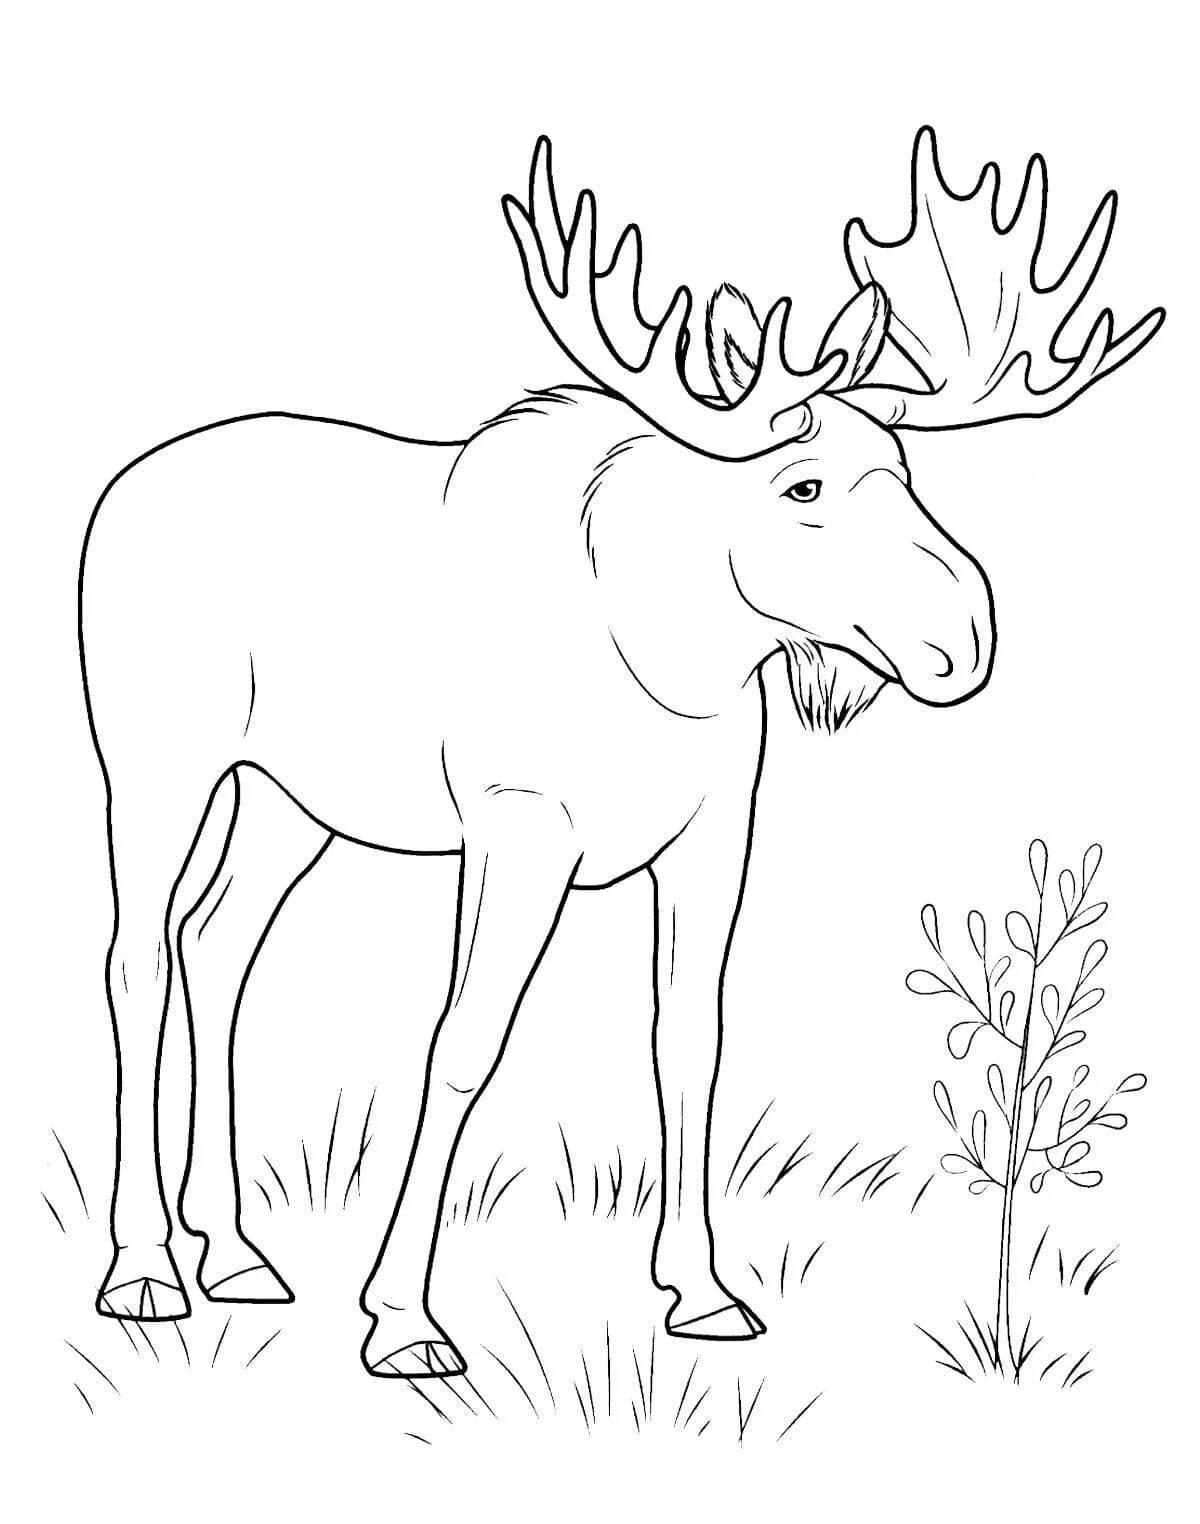 Great forest animal coloring pages for kids